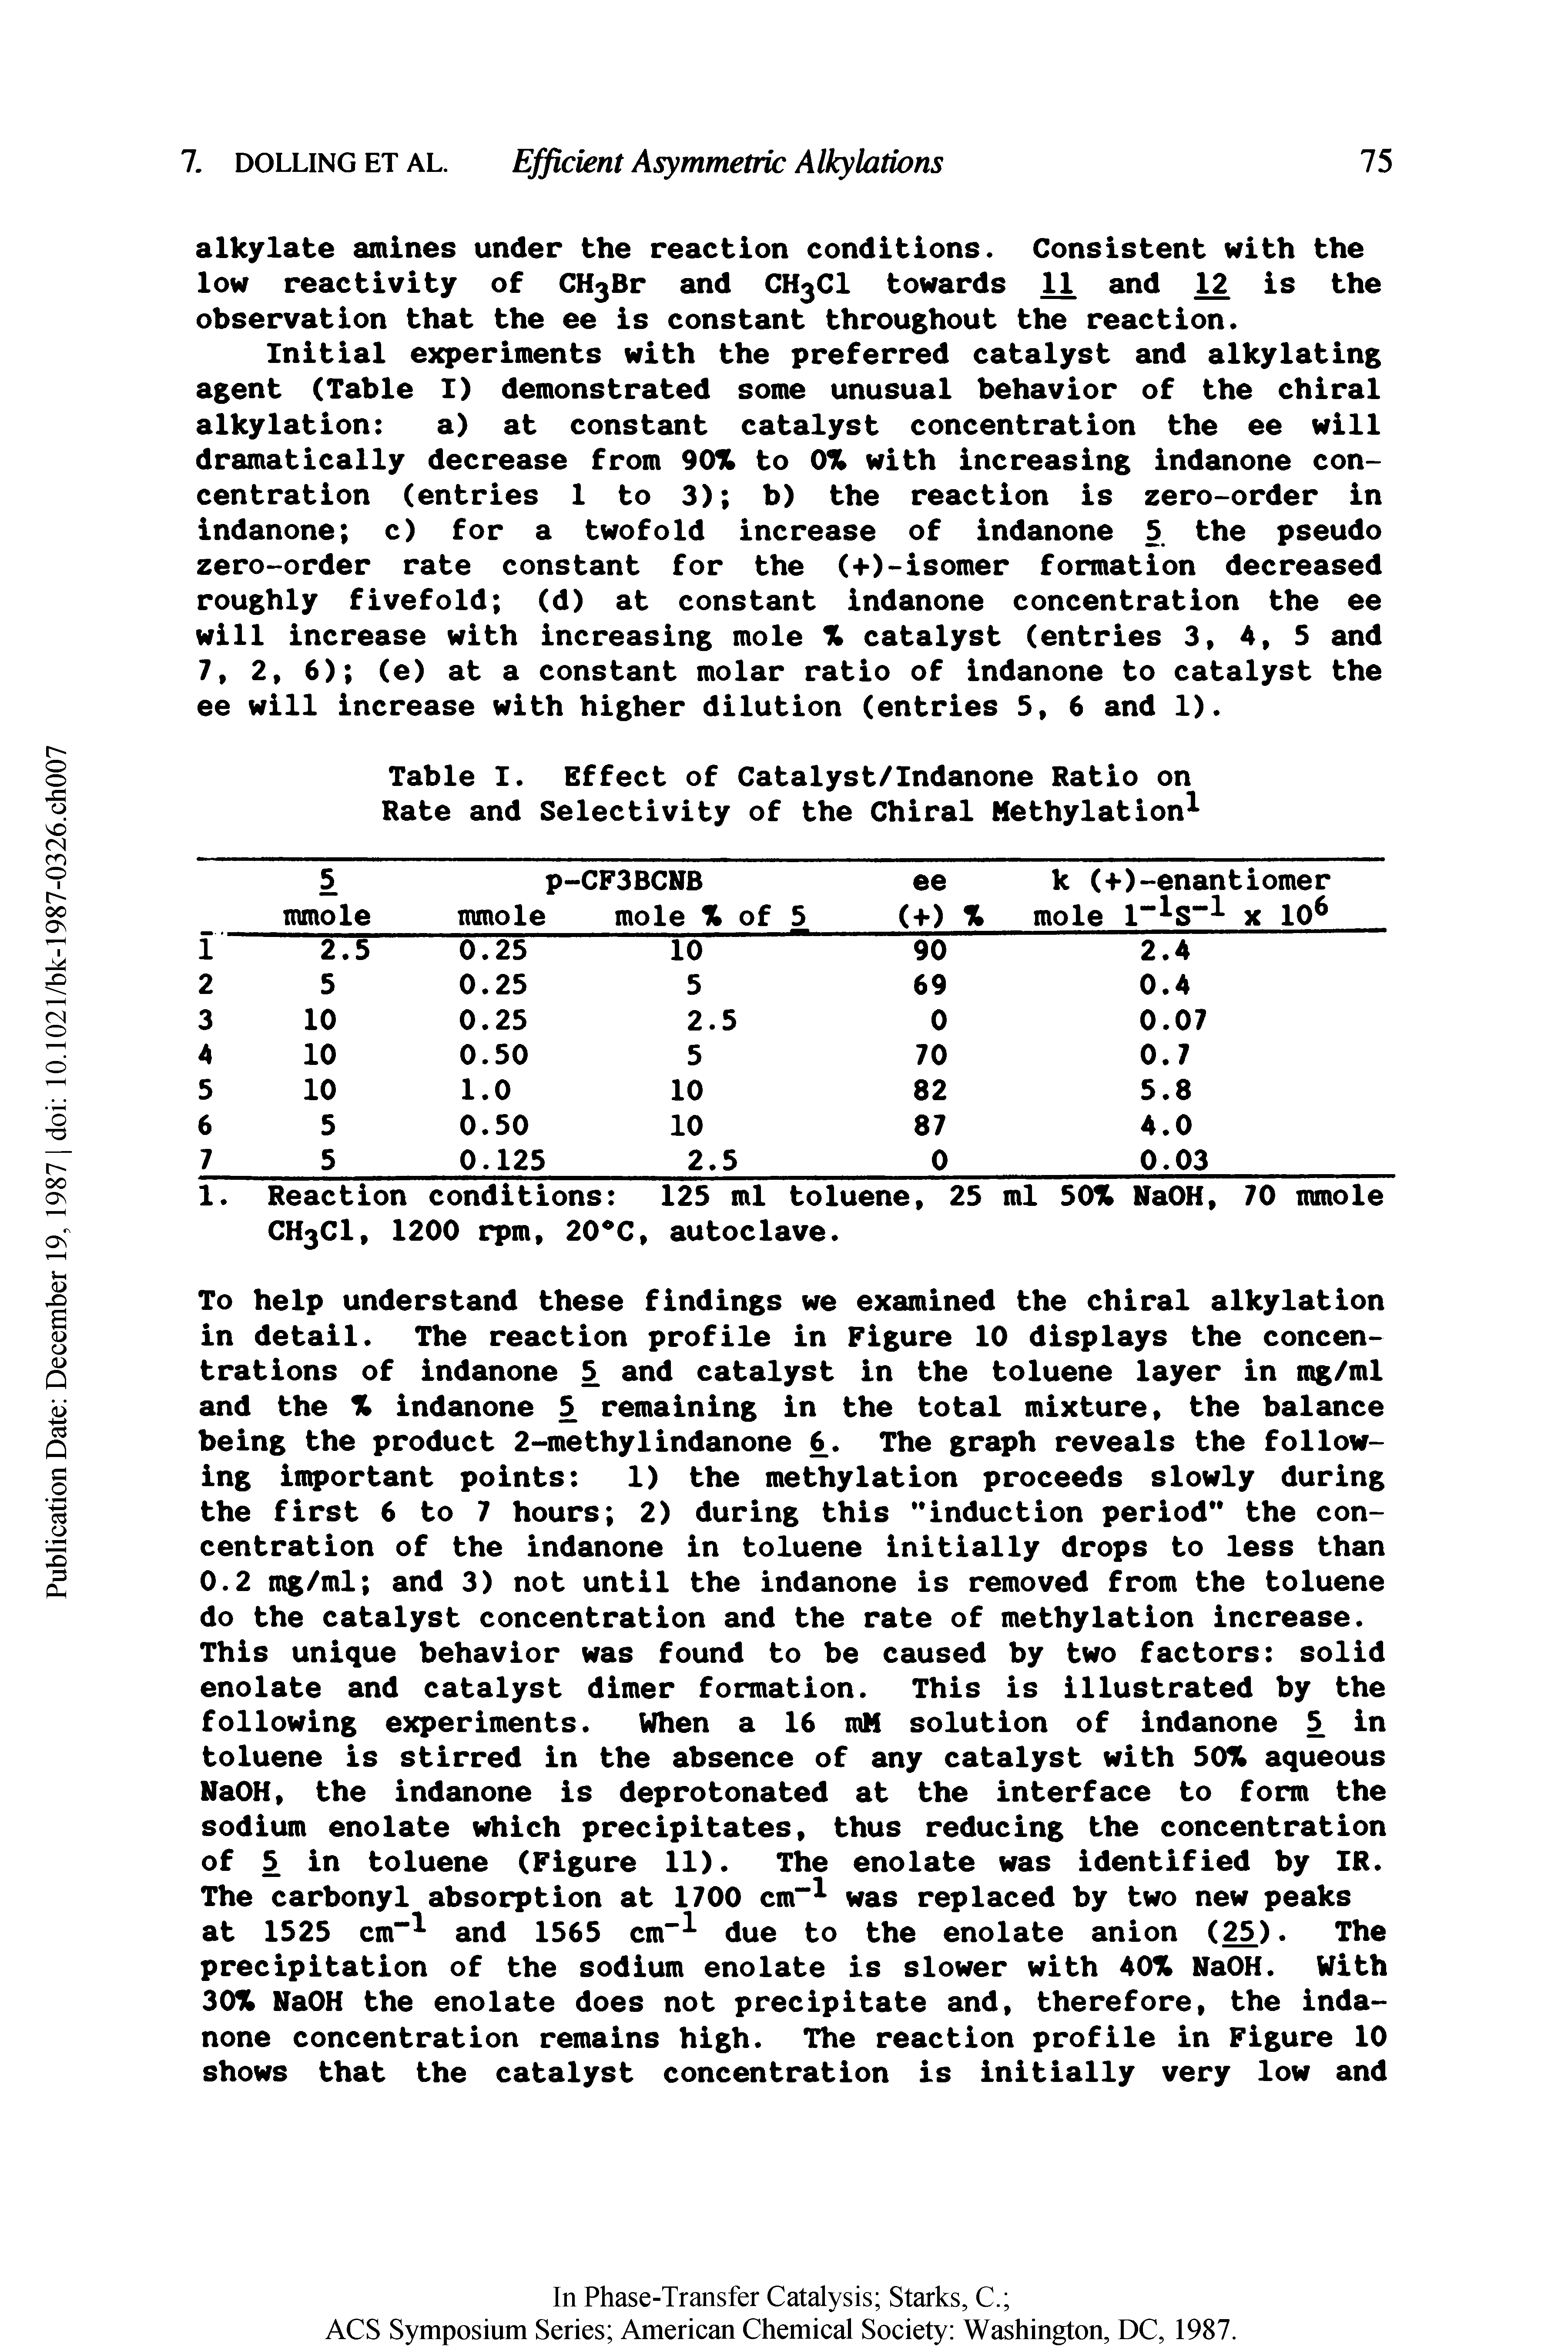 Table I. Effect of Catalyst/Indanone Ratio on Rate and Selectivity of the Chiral Methylation ...